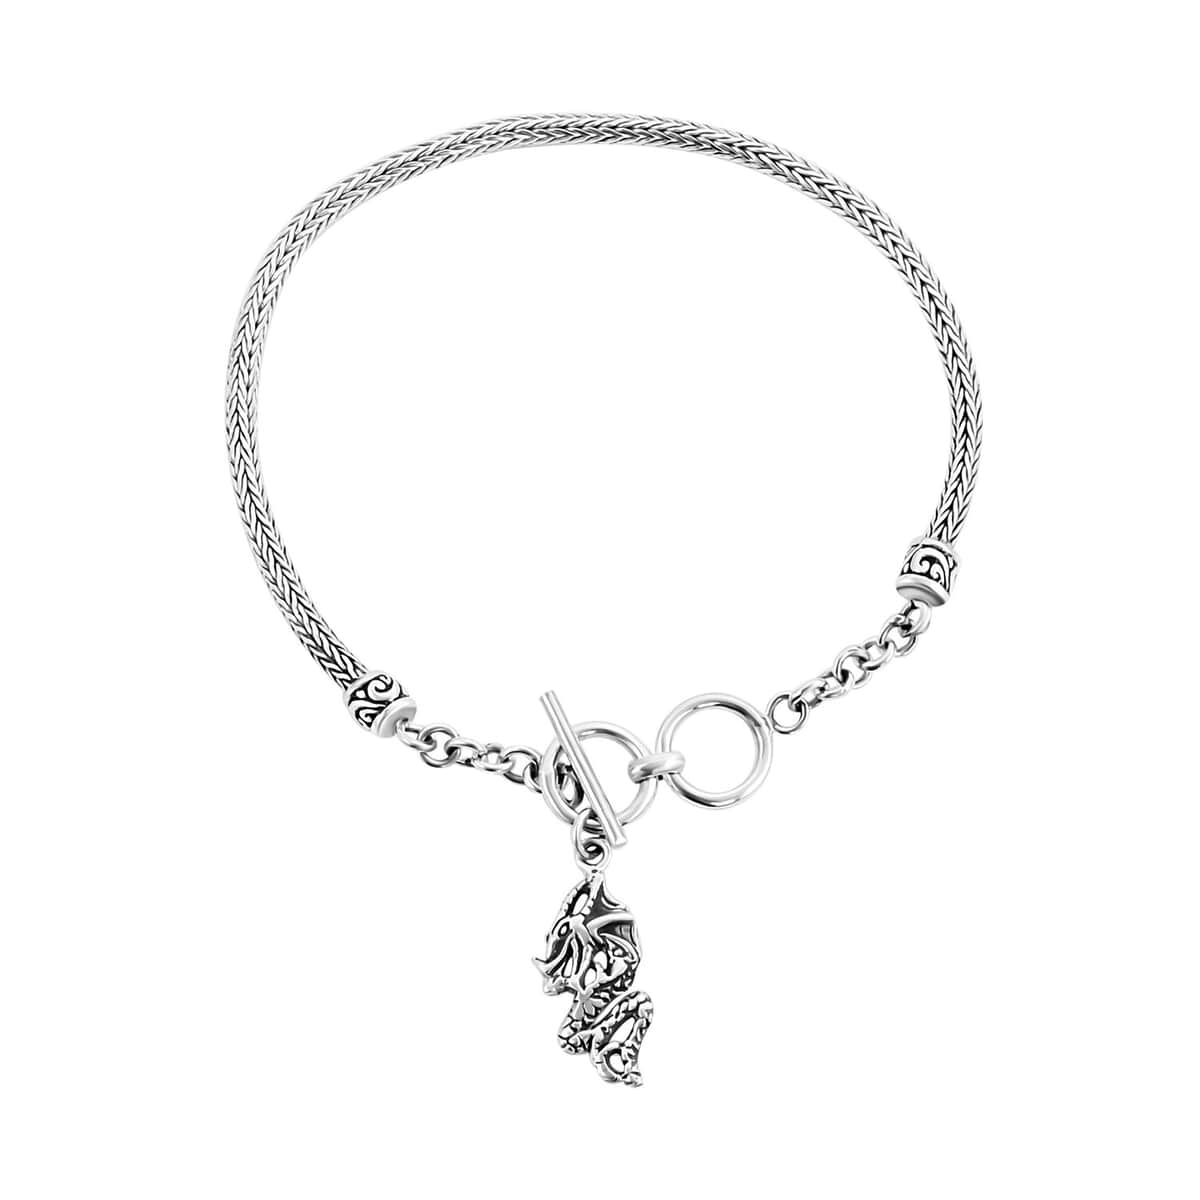 Bali Legacy Sterling Silver Tulang Naga Dragon Bracelet with Dragon Charm (6.50-8.0In) 8.20 Grams image number 0